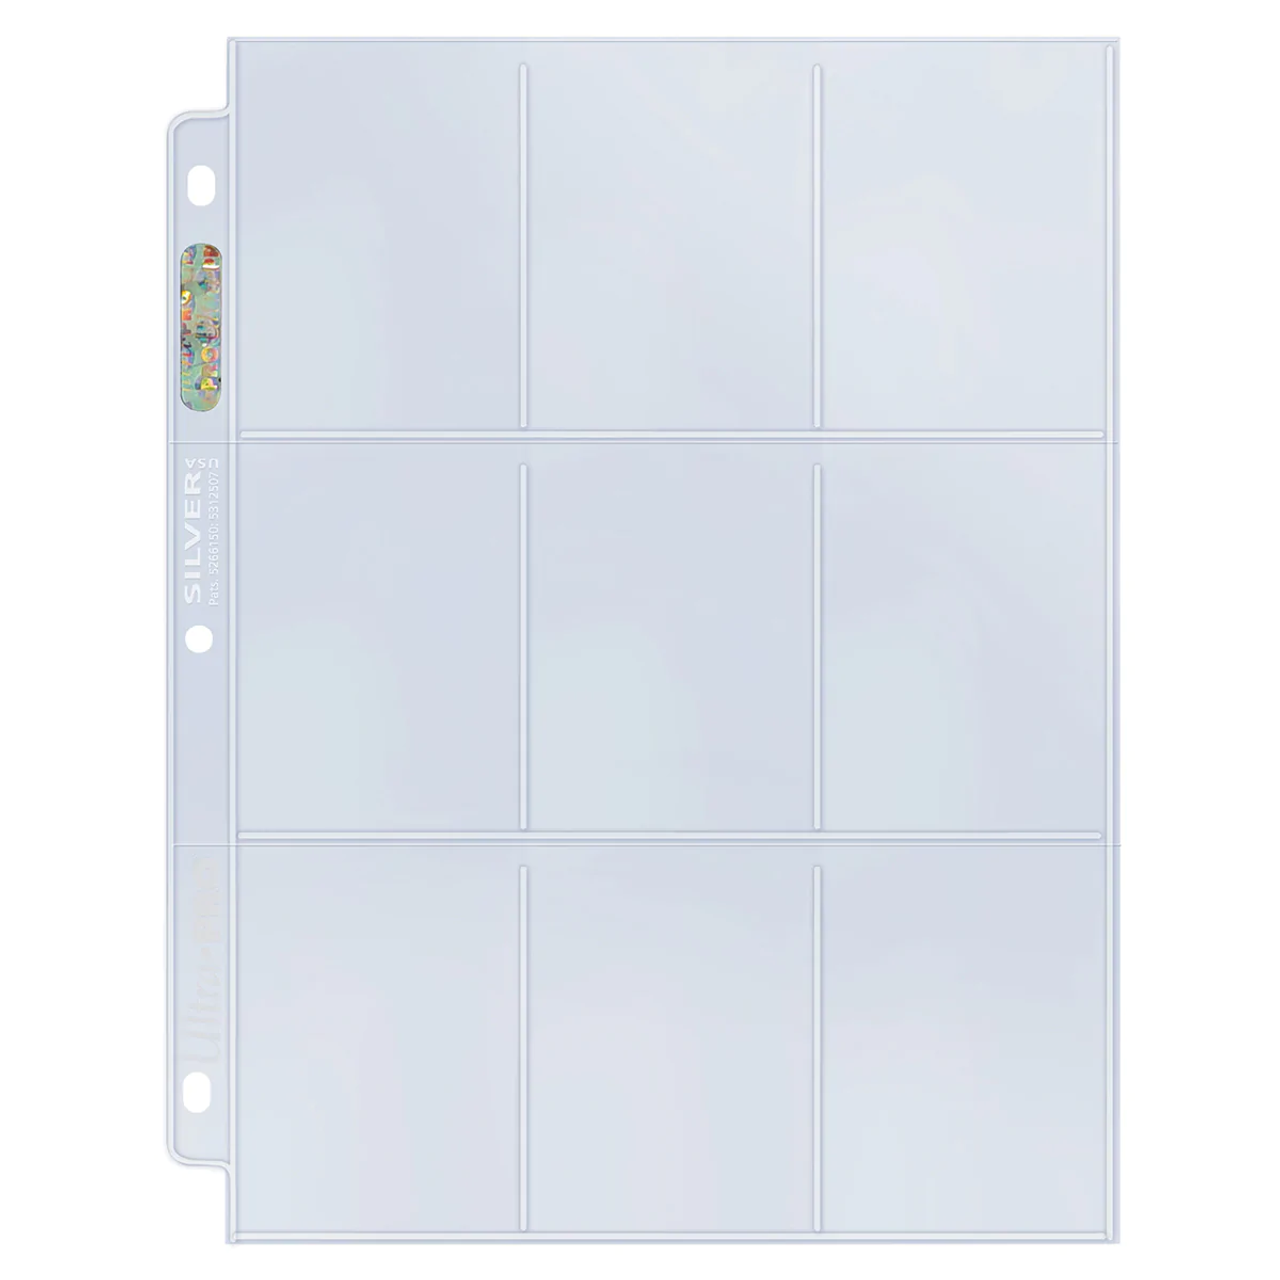 Ultra Pro Silver Series 9-Pocket Pages 100ct Box / Case of 10